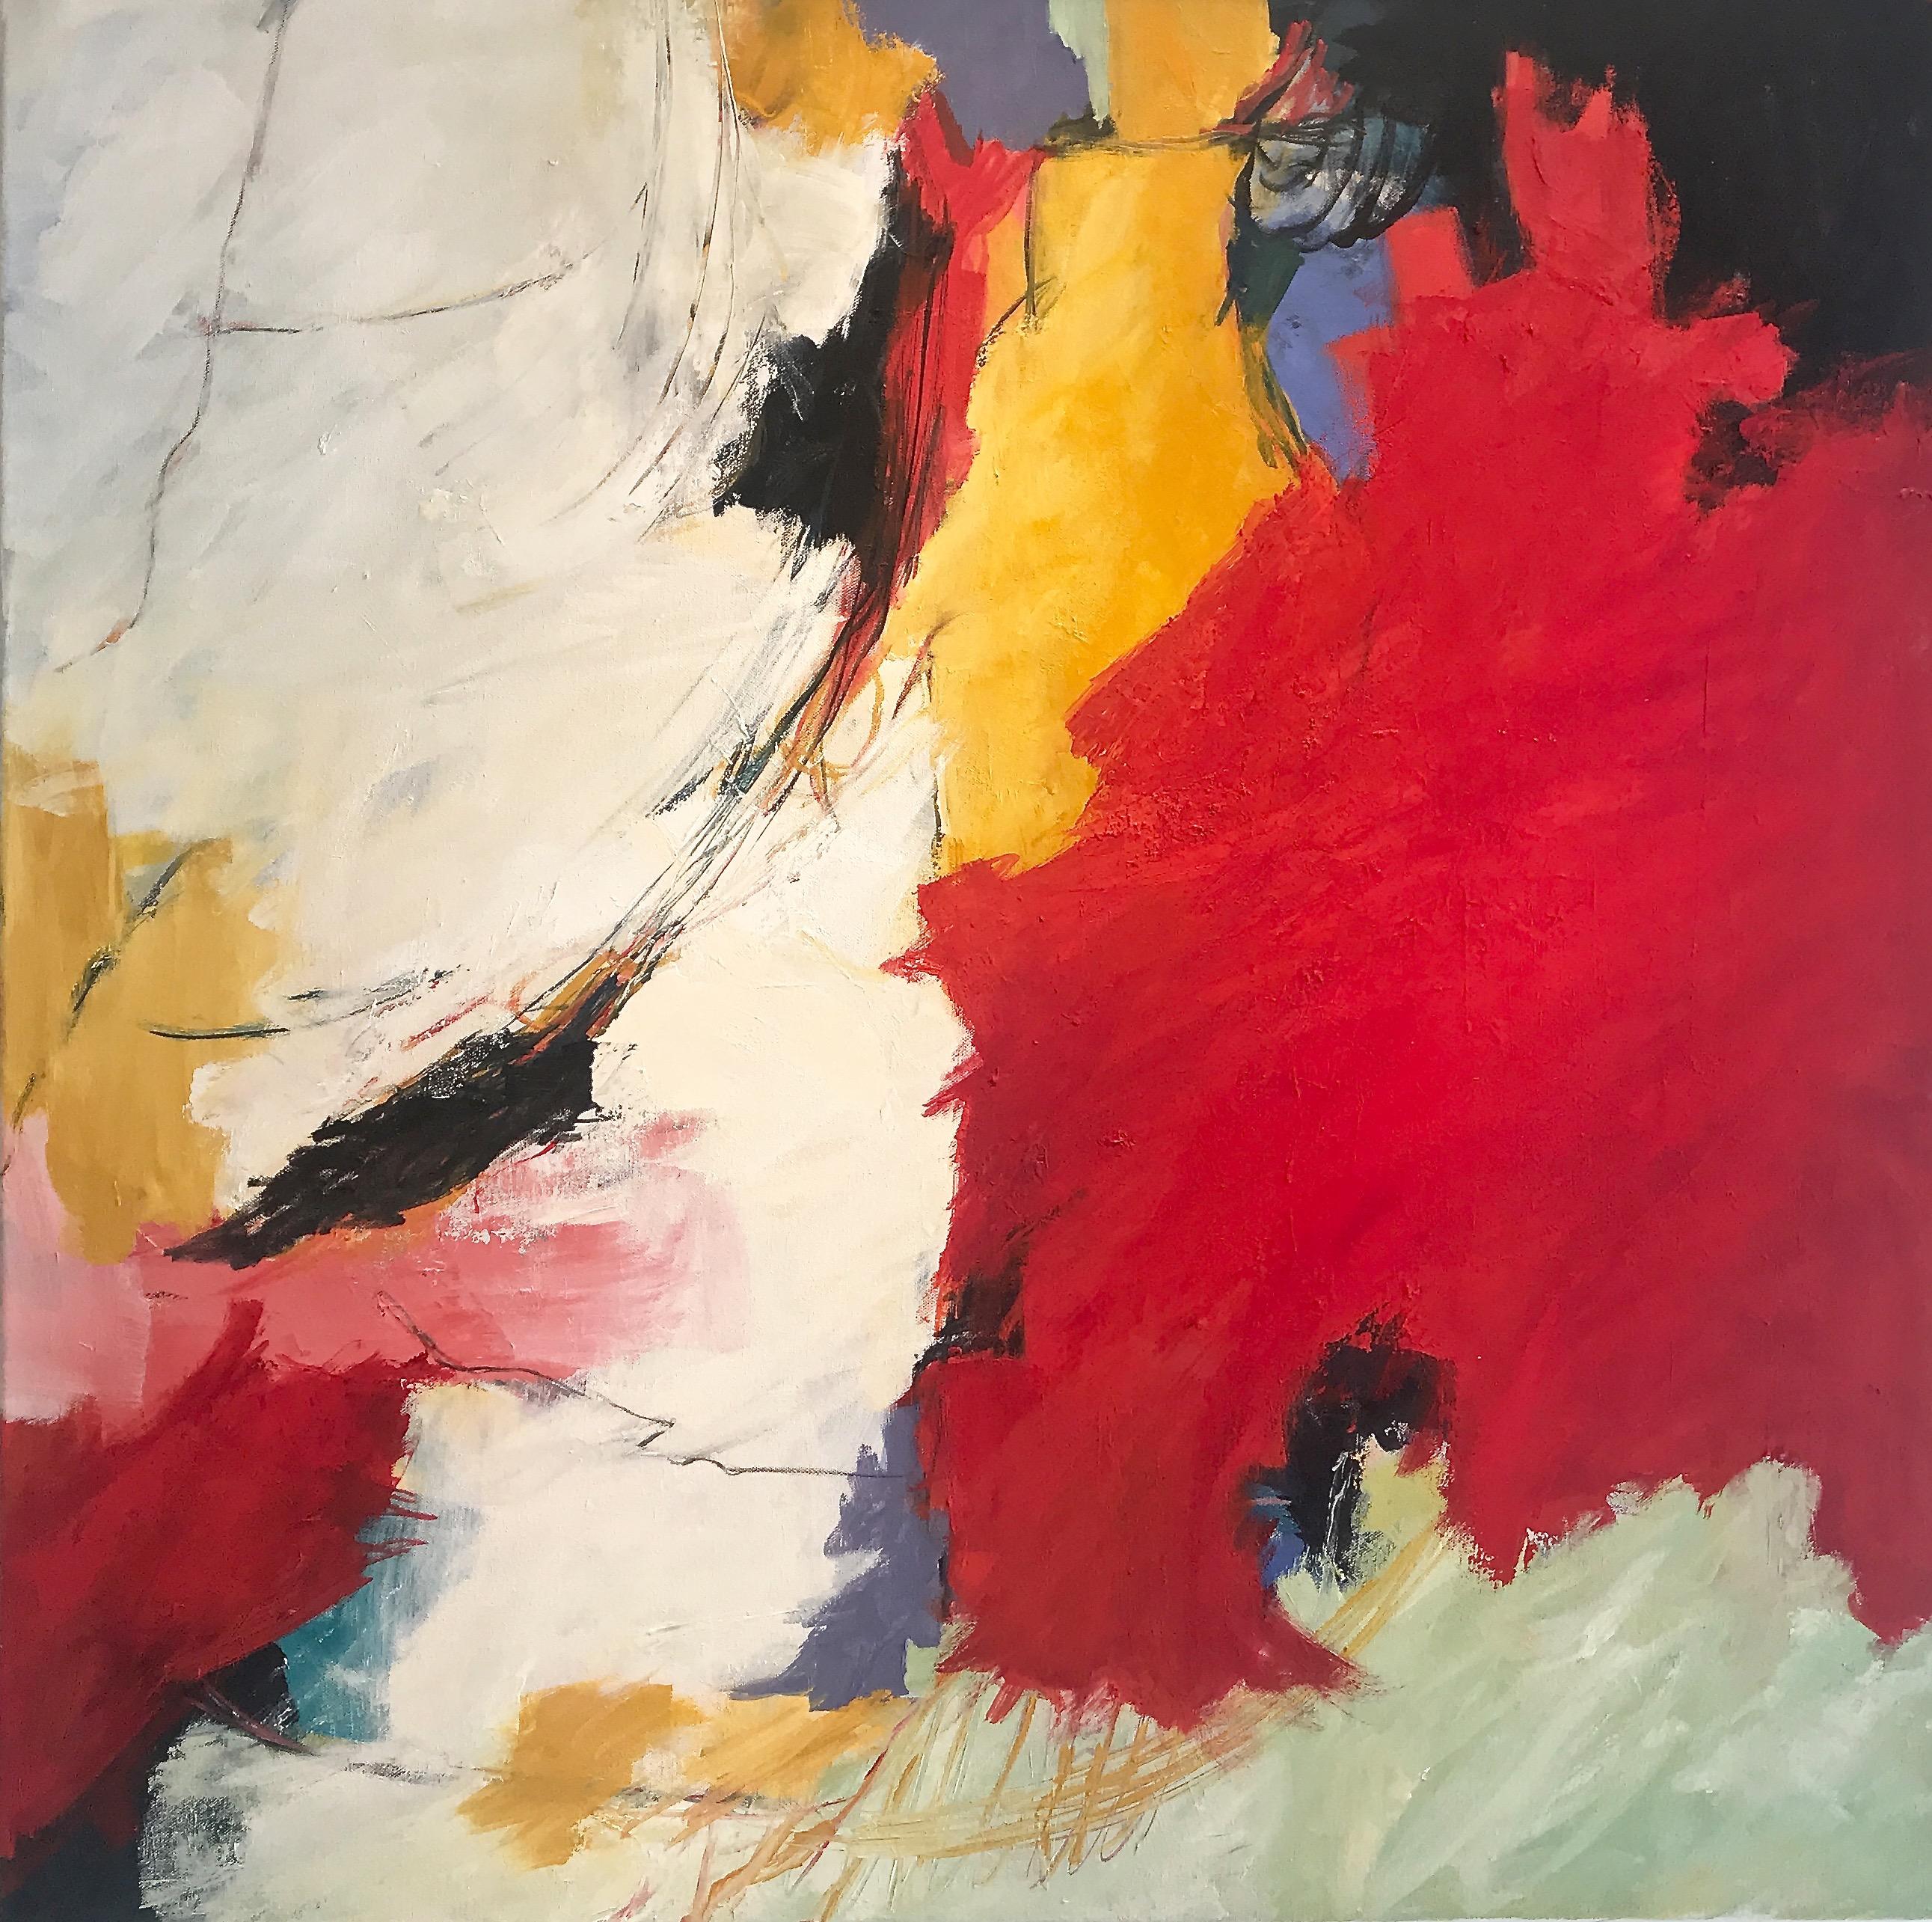 Abstract Painting Cathy Bennigson - "Ode to Connections"  Expressionniste abstrait rouge, blanc, noir, ocre jaune, Ptg.